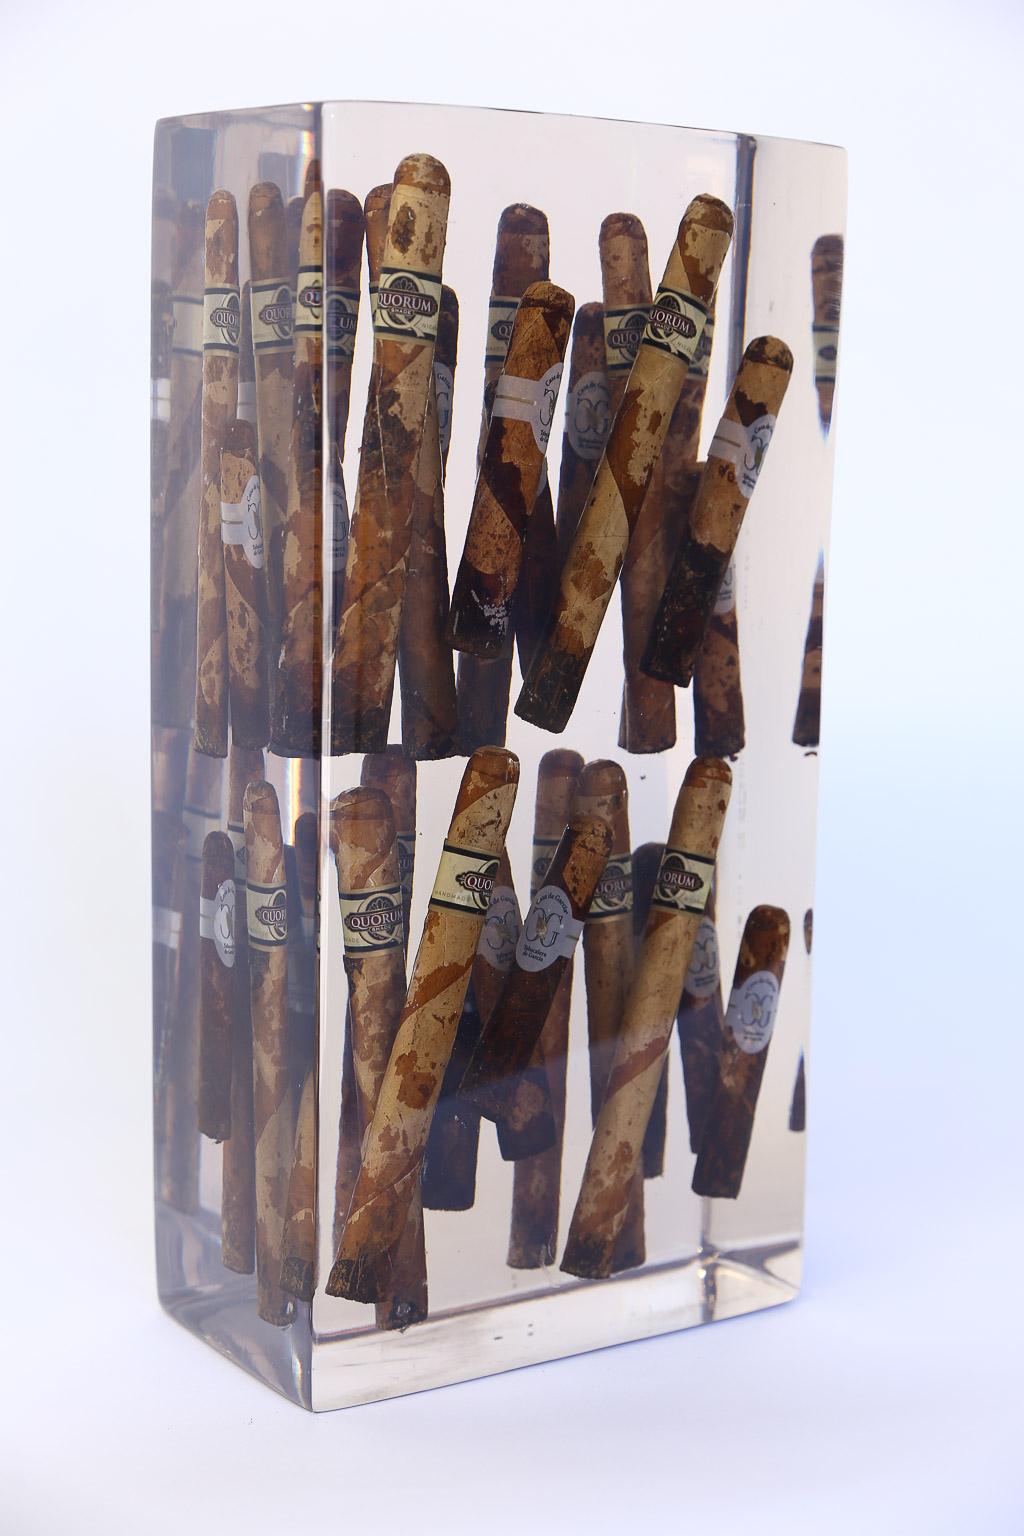 Add that touch of the unexpected with this whimsical art work of cigars emerged in resin. With the free floating illusion of the cigars it is sure to start a conversation if placed in your home or office.